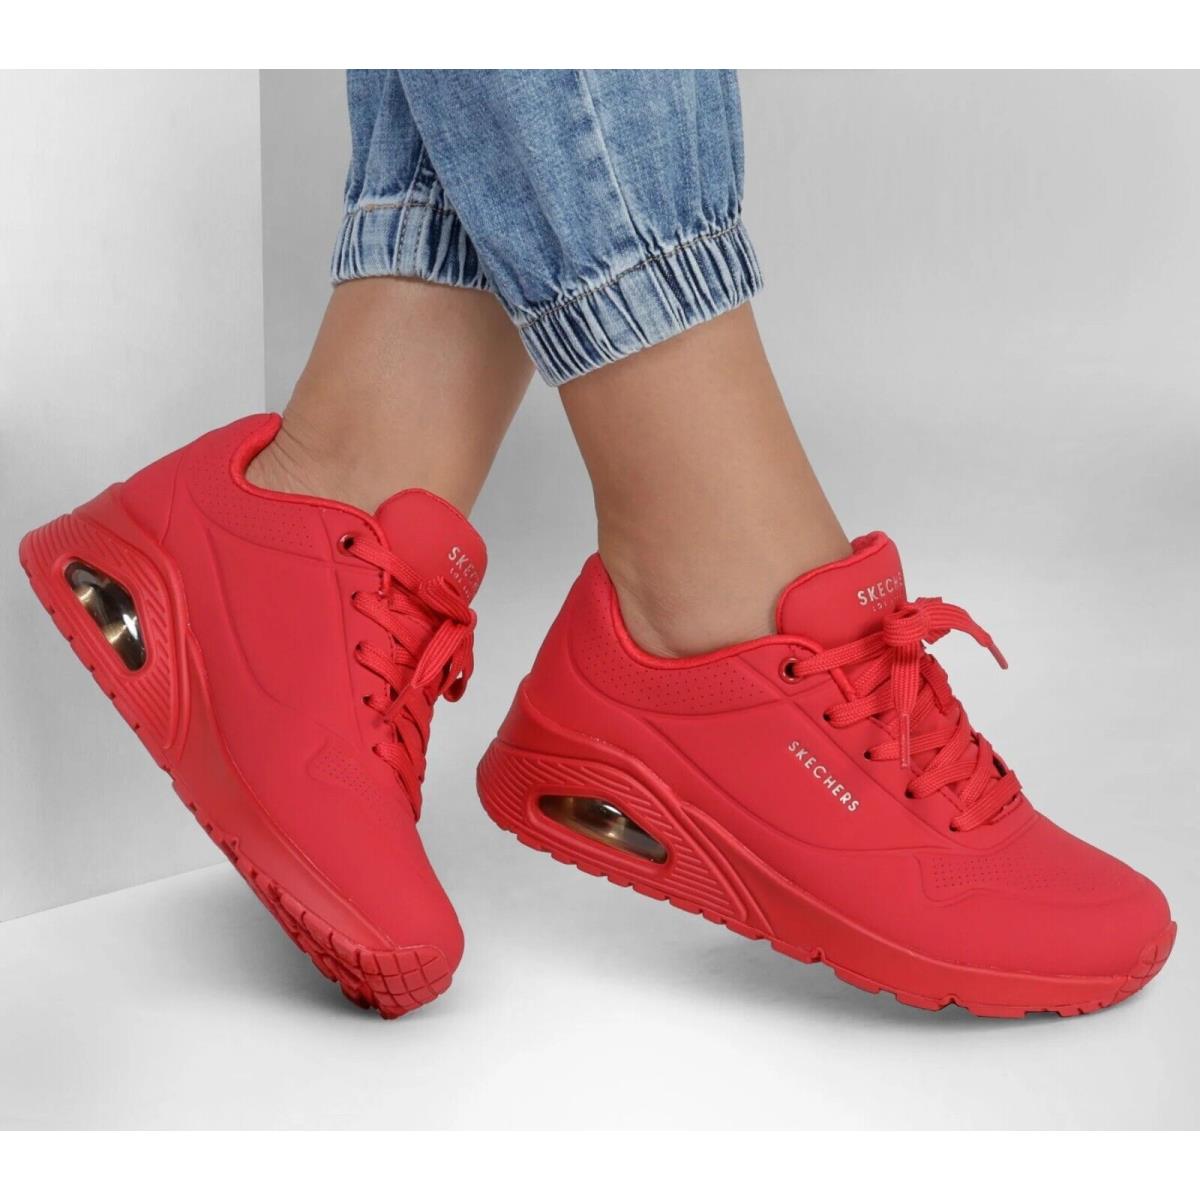 Skechers shoes  - Red 12